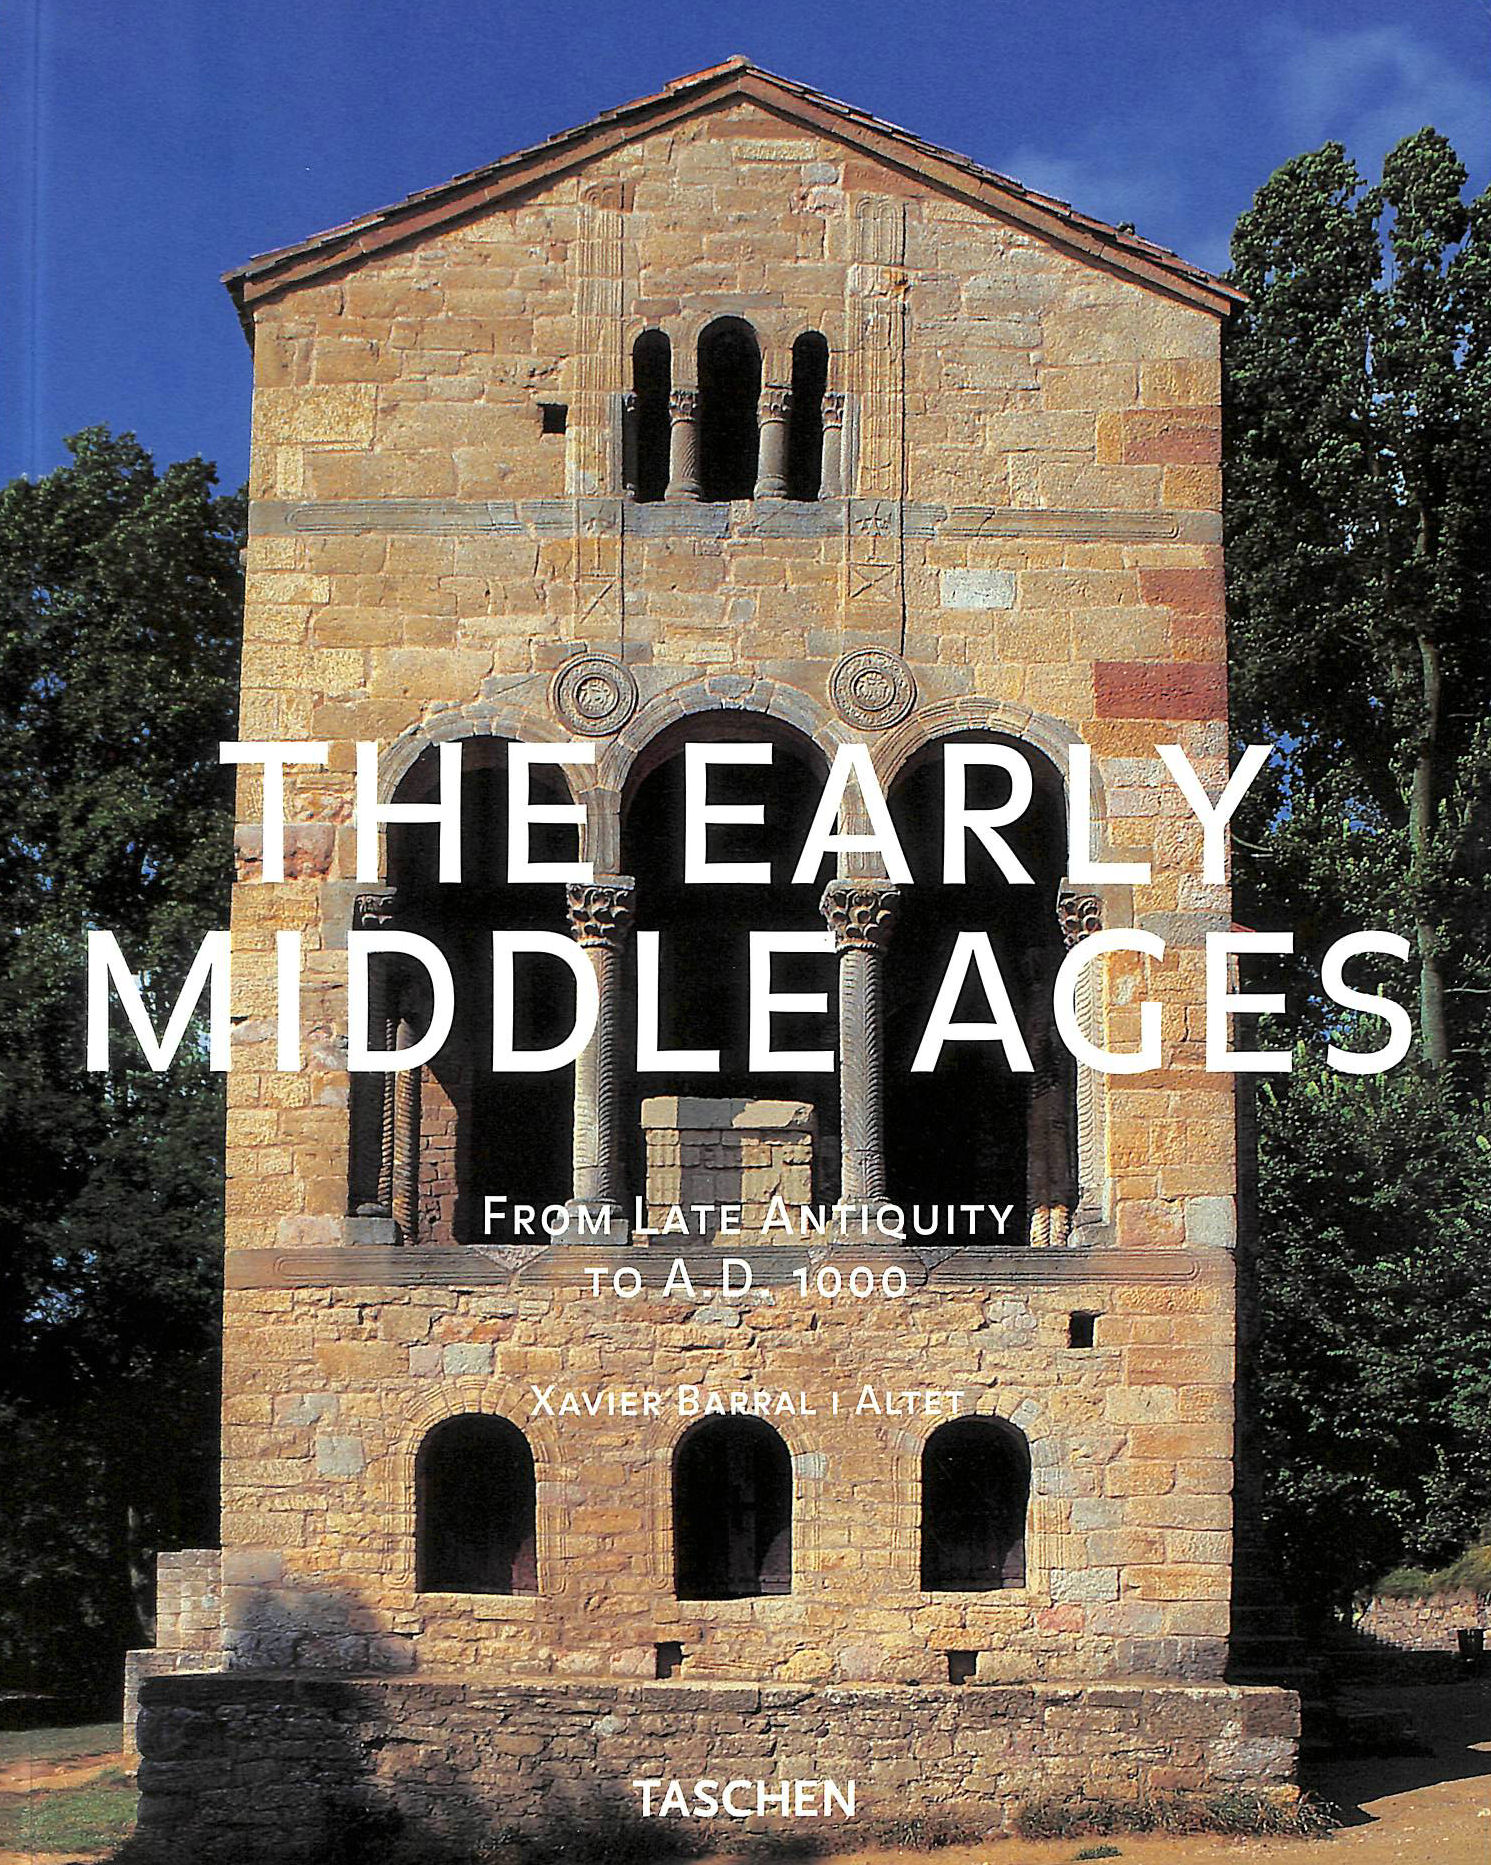 ALTET, XAVIER BARRAL - The Early Middle Ages (World Architecture)